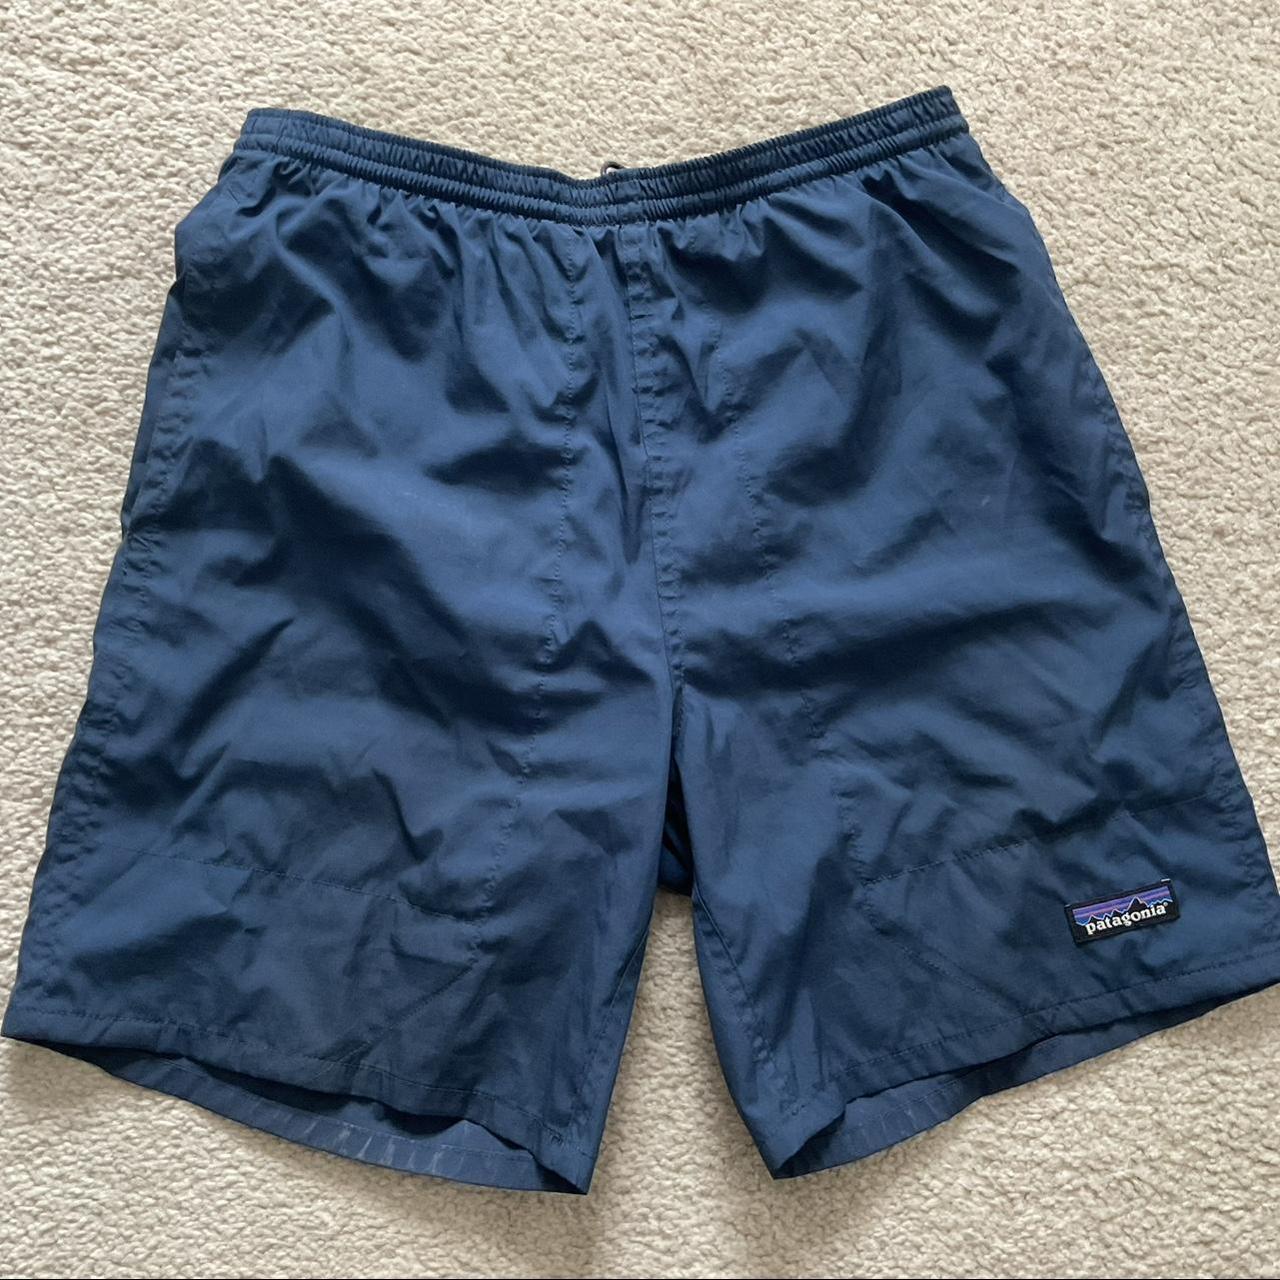 Patagonia Swim shorts in small. Worn a handful of... - Depop